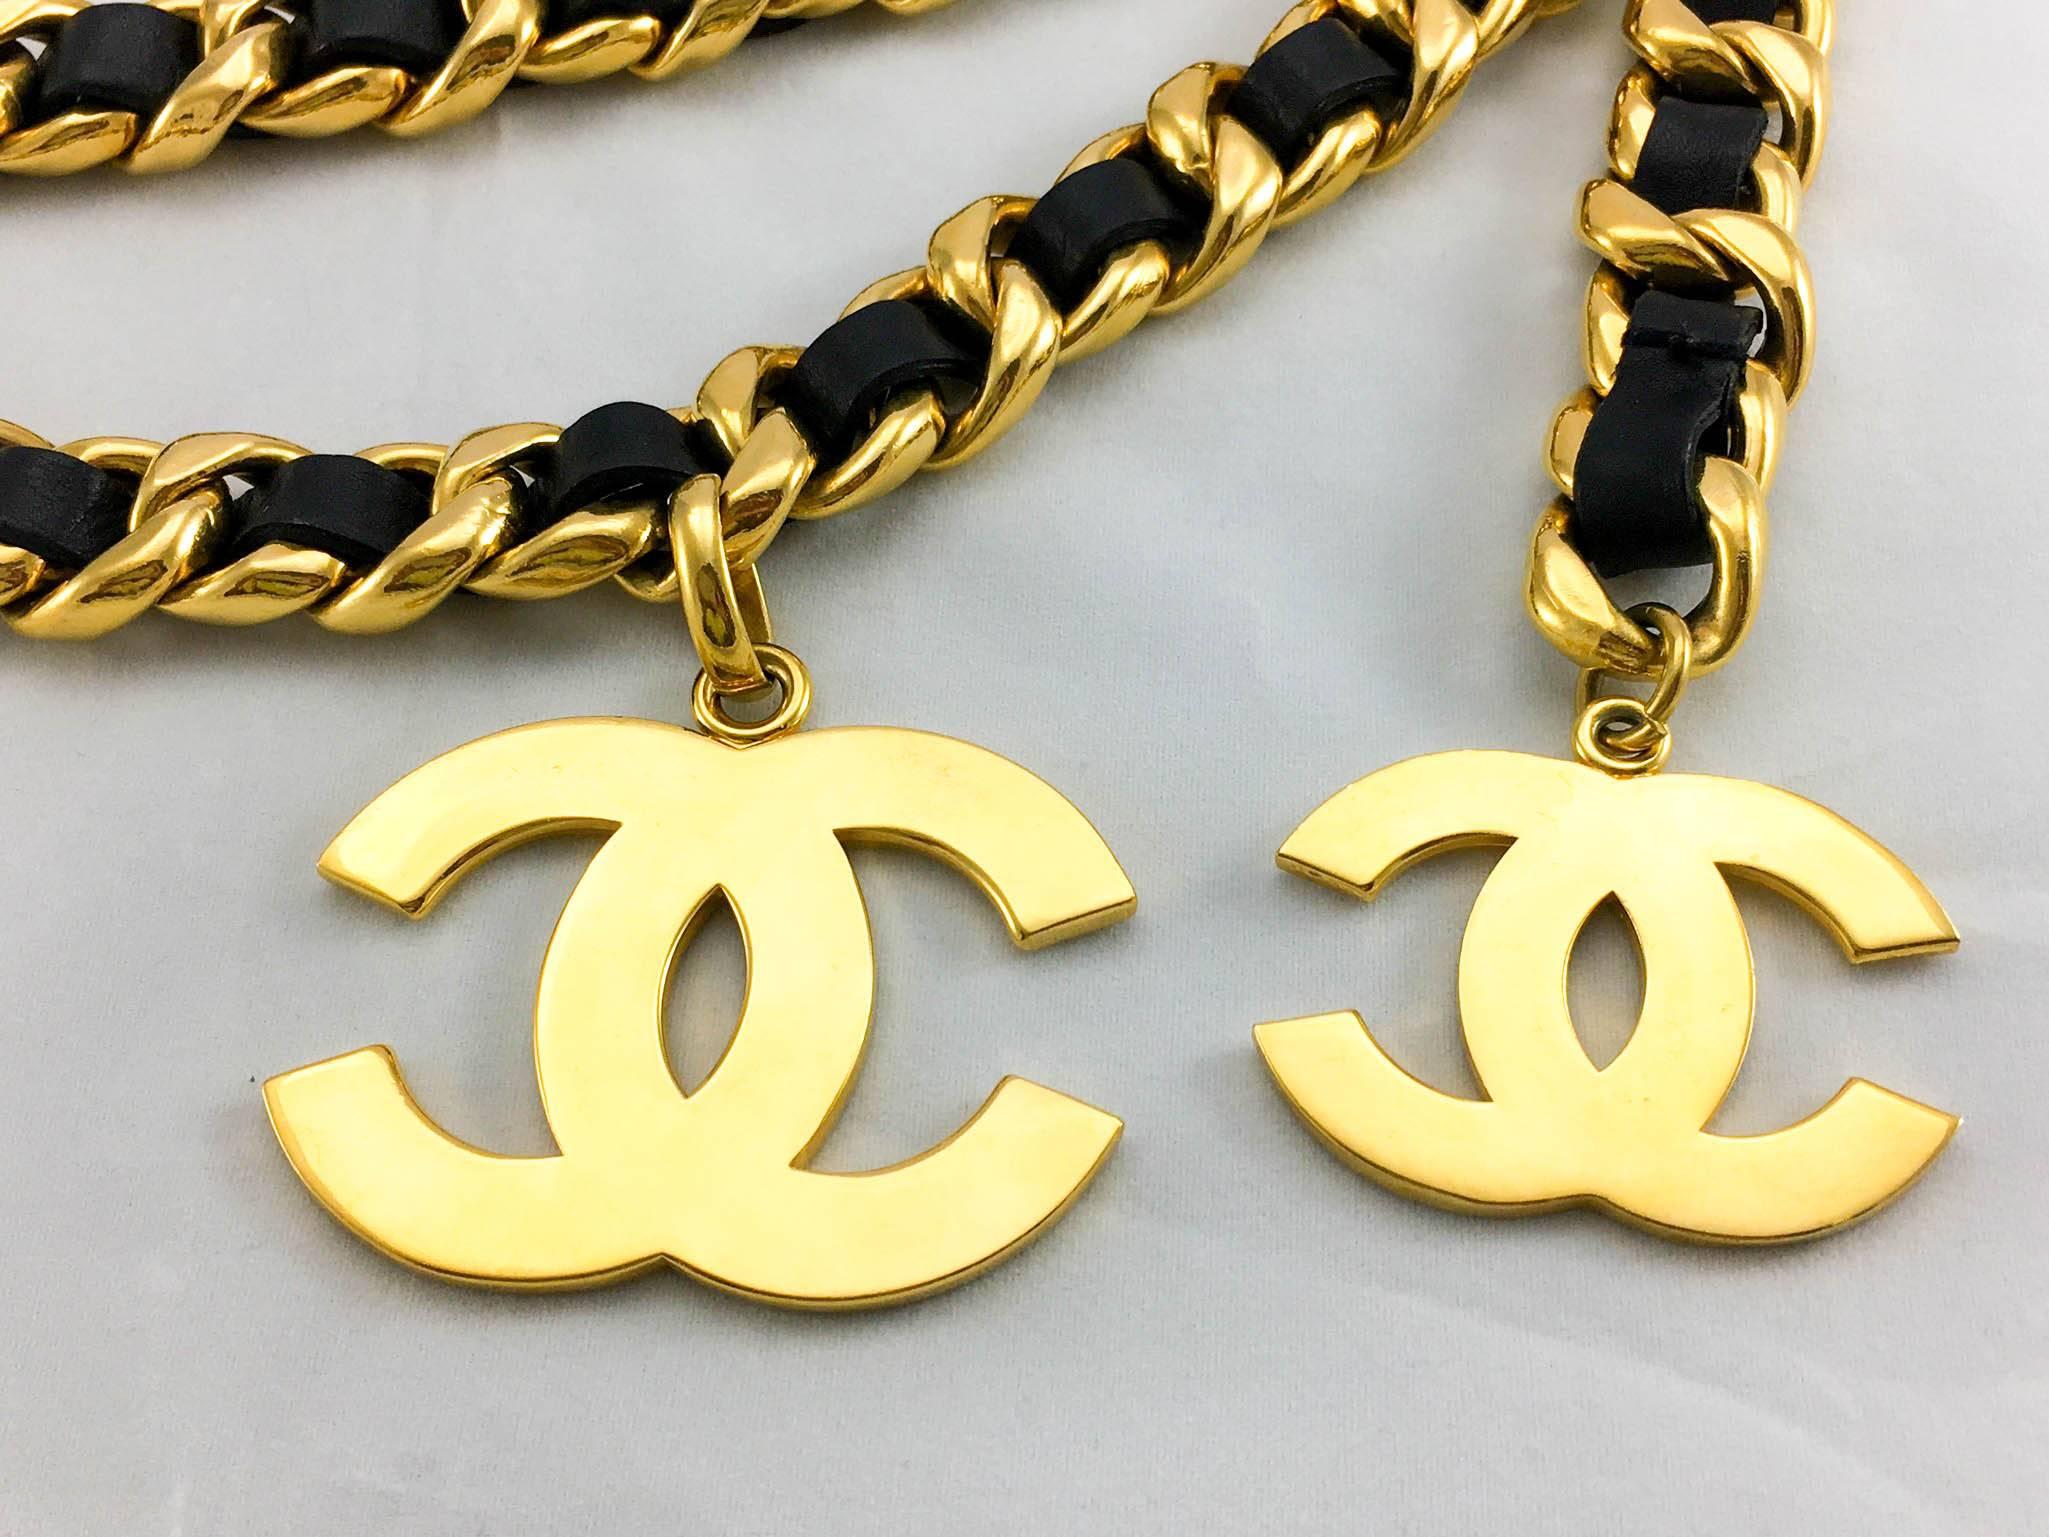 Chanel Runway Black Leather and Gold-Tone Chain Logo Belt - Circa 1992 In Excellent Condition In London, Chelsea